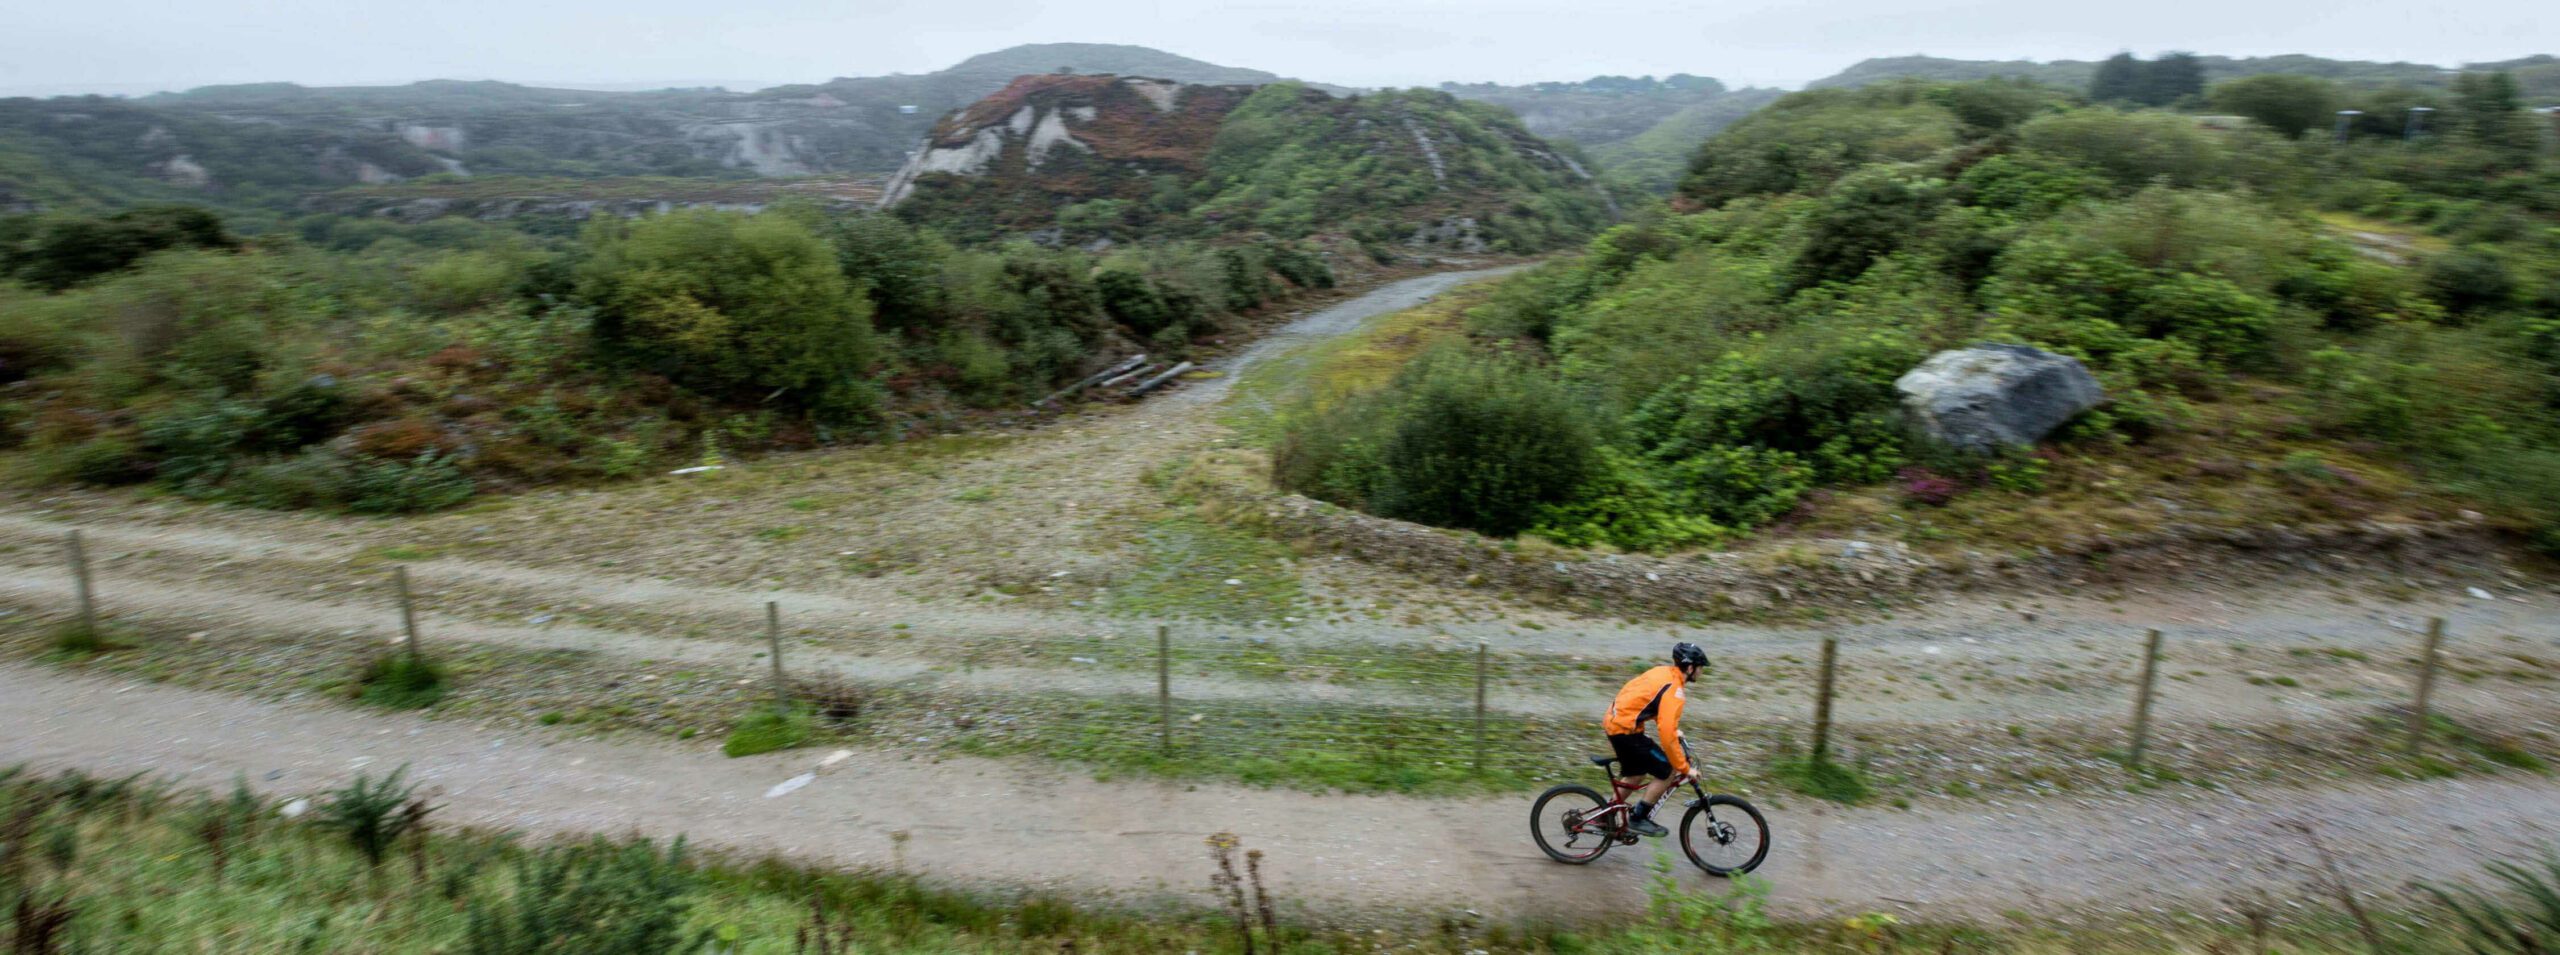 Cycling on the St Austell Clay Trails | St Austell